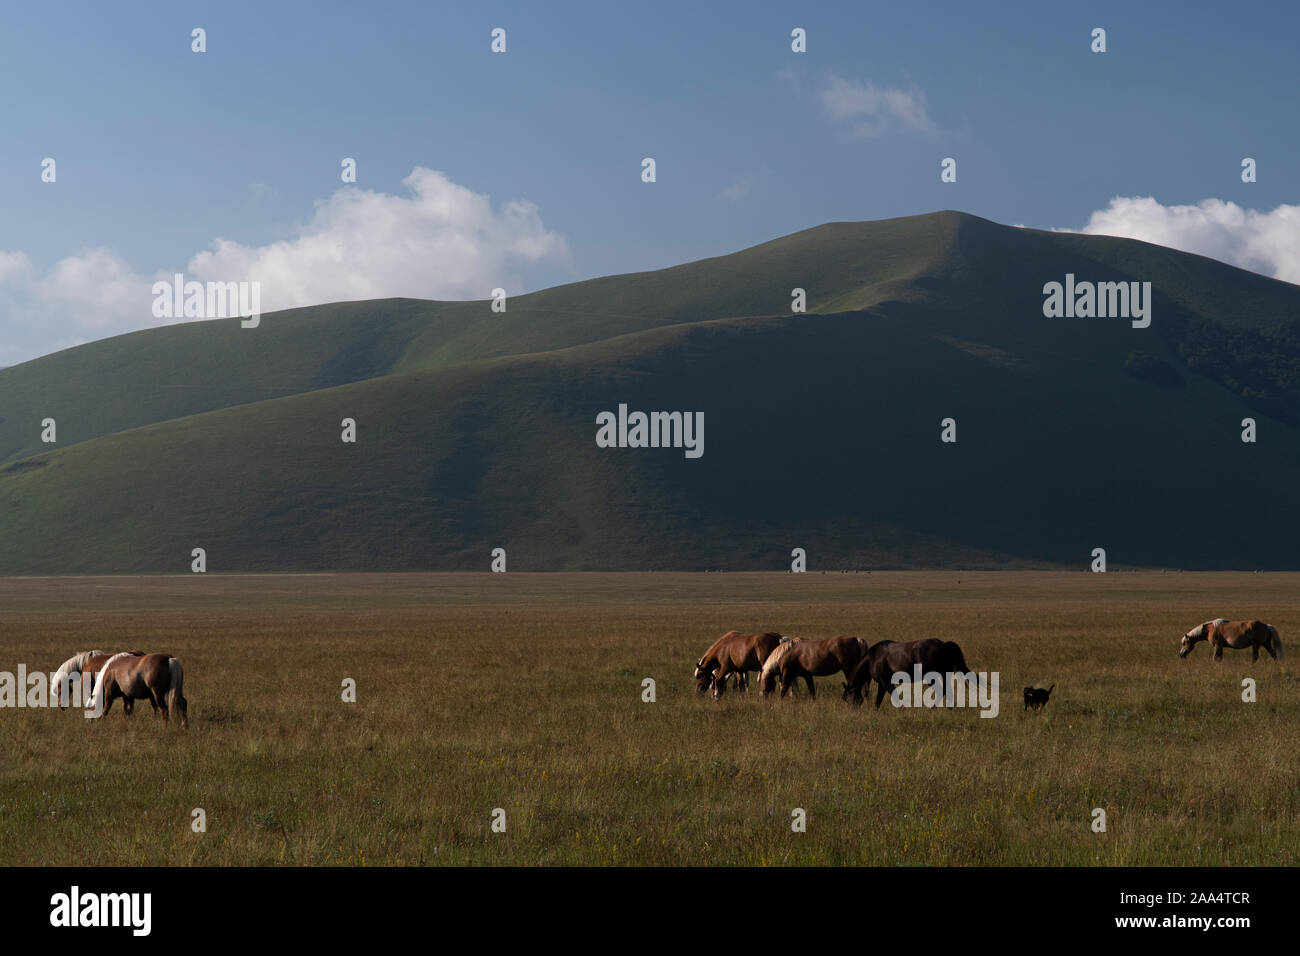 A Dog running amongst Horses grazing in a meadow, Castelluccio di Norcia, Umbria, Italy Stock Photo